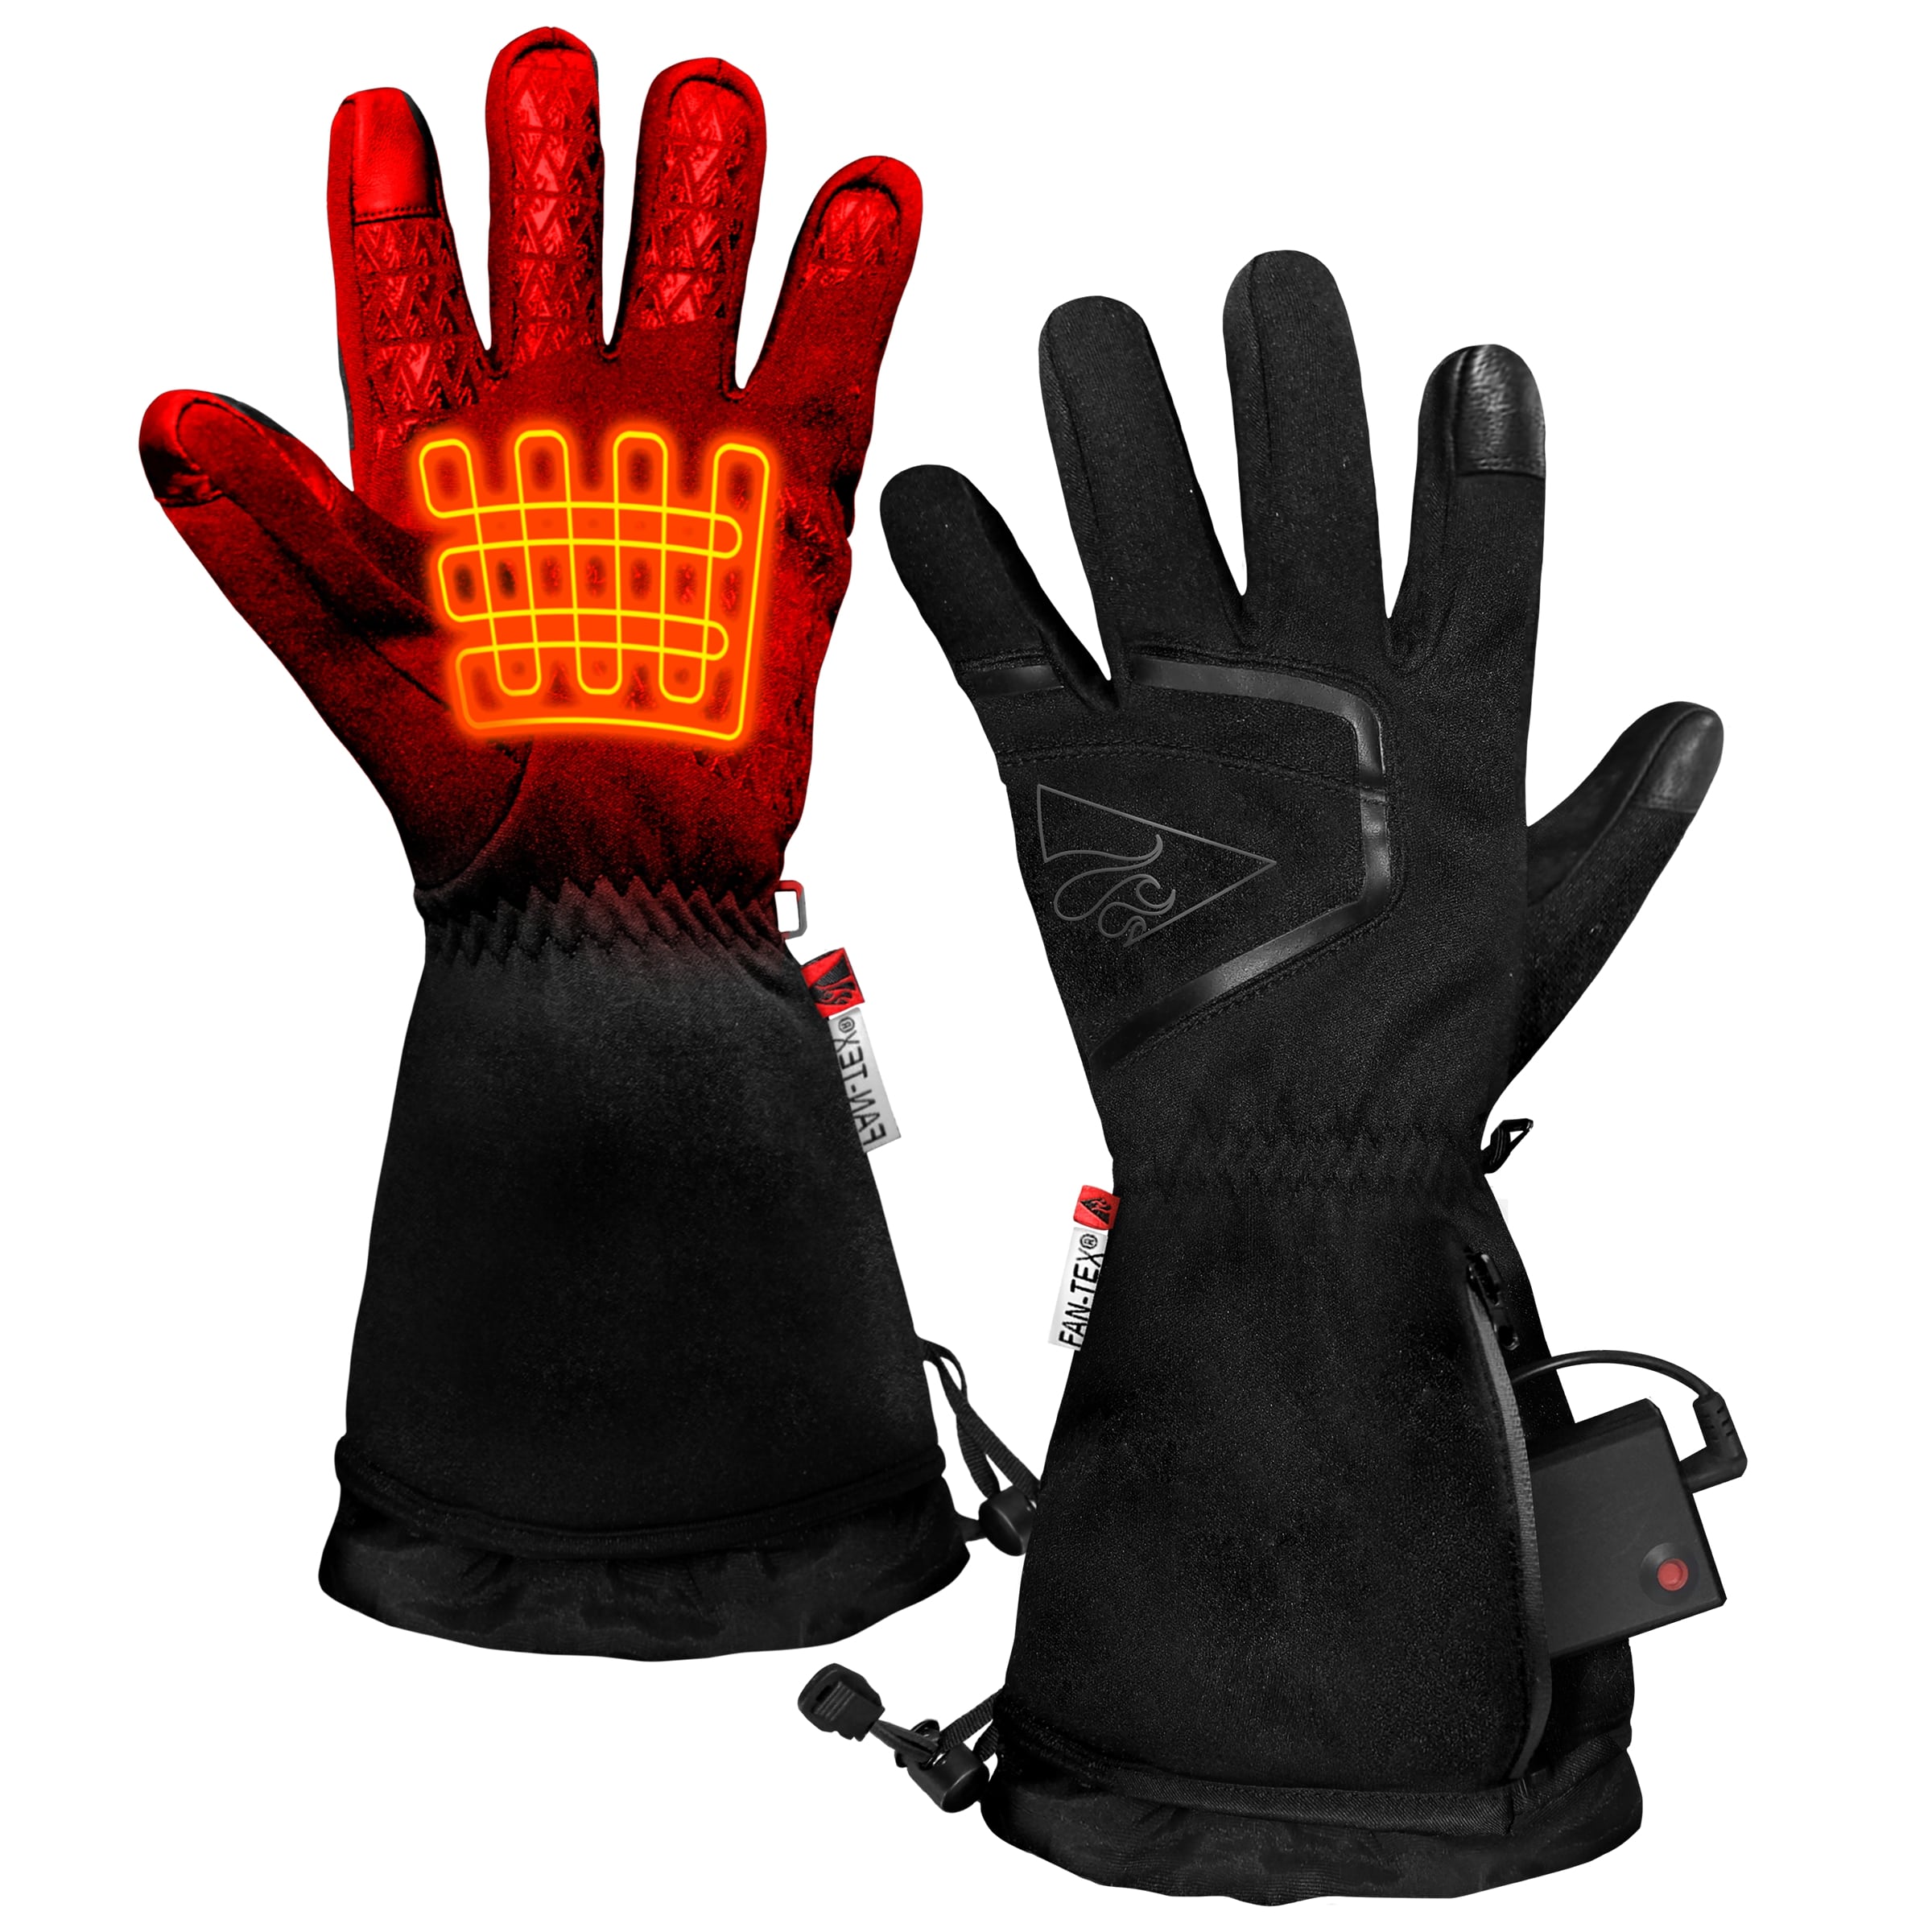 BATTERY HEATED WINTER GLOVES SMALL "BRAND NEW" 